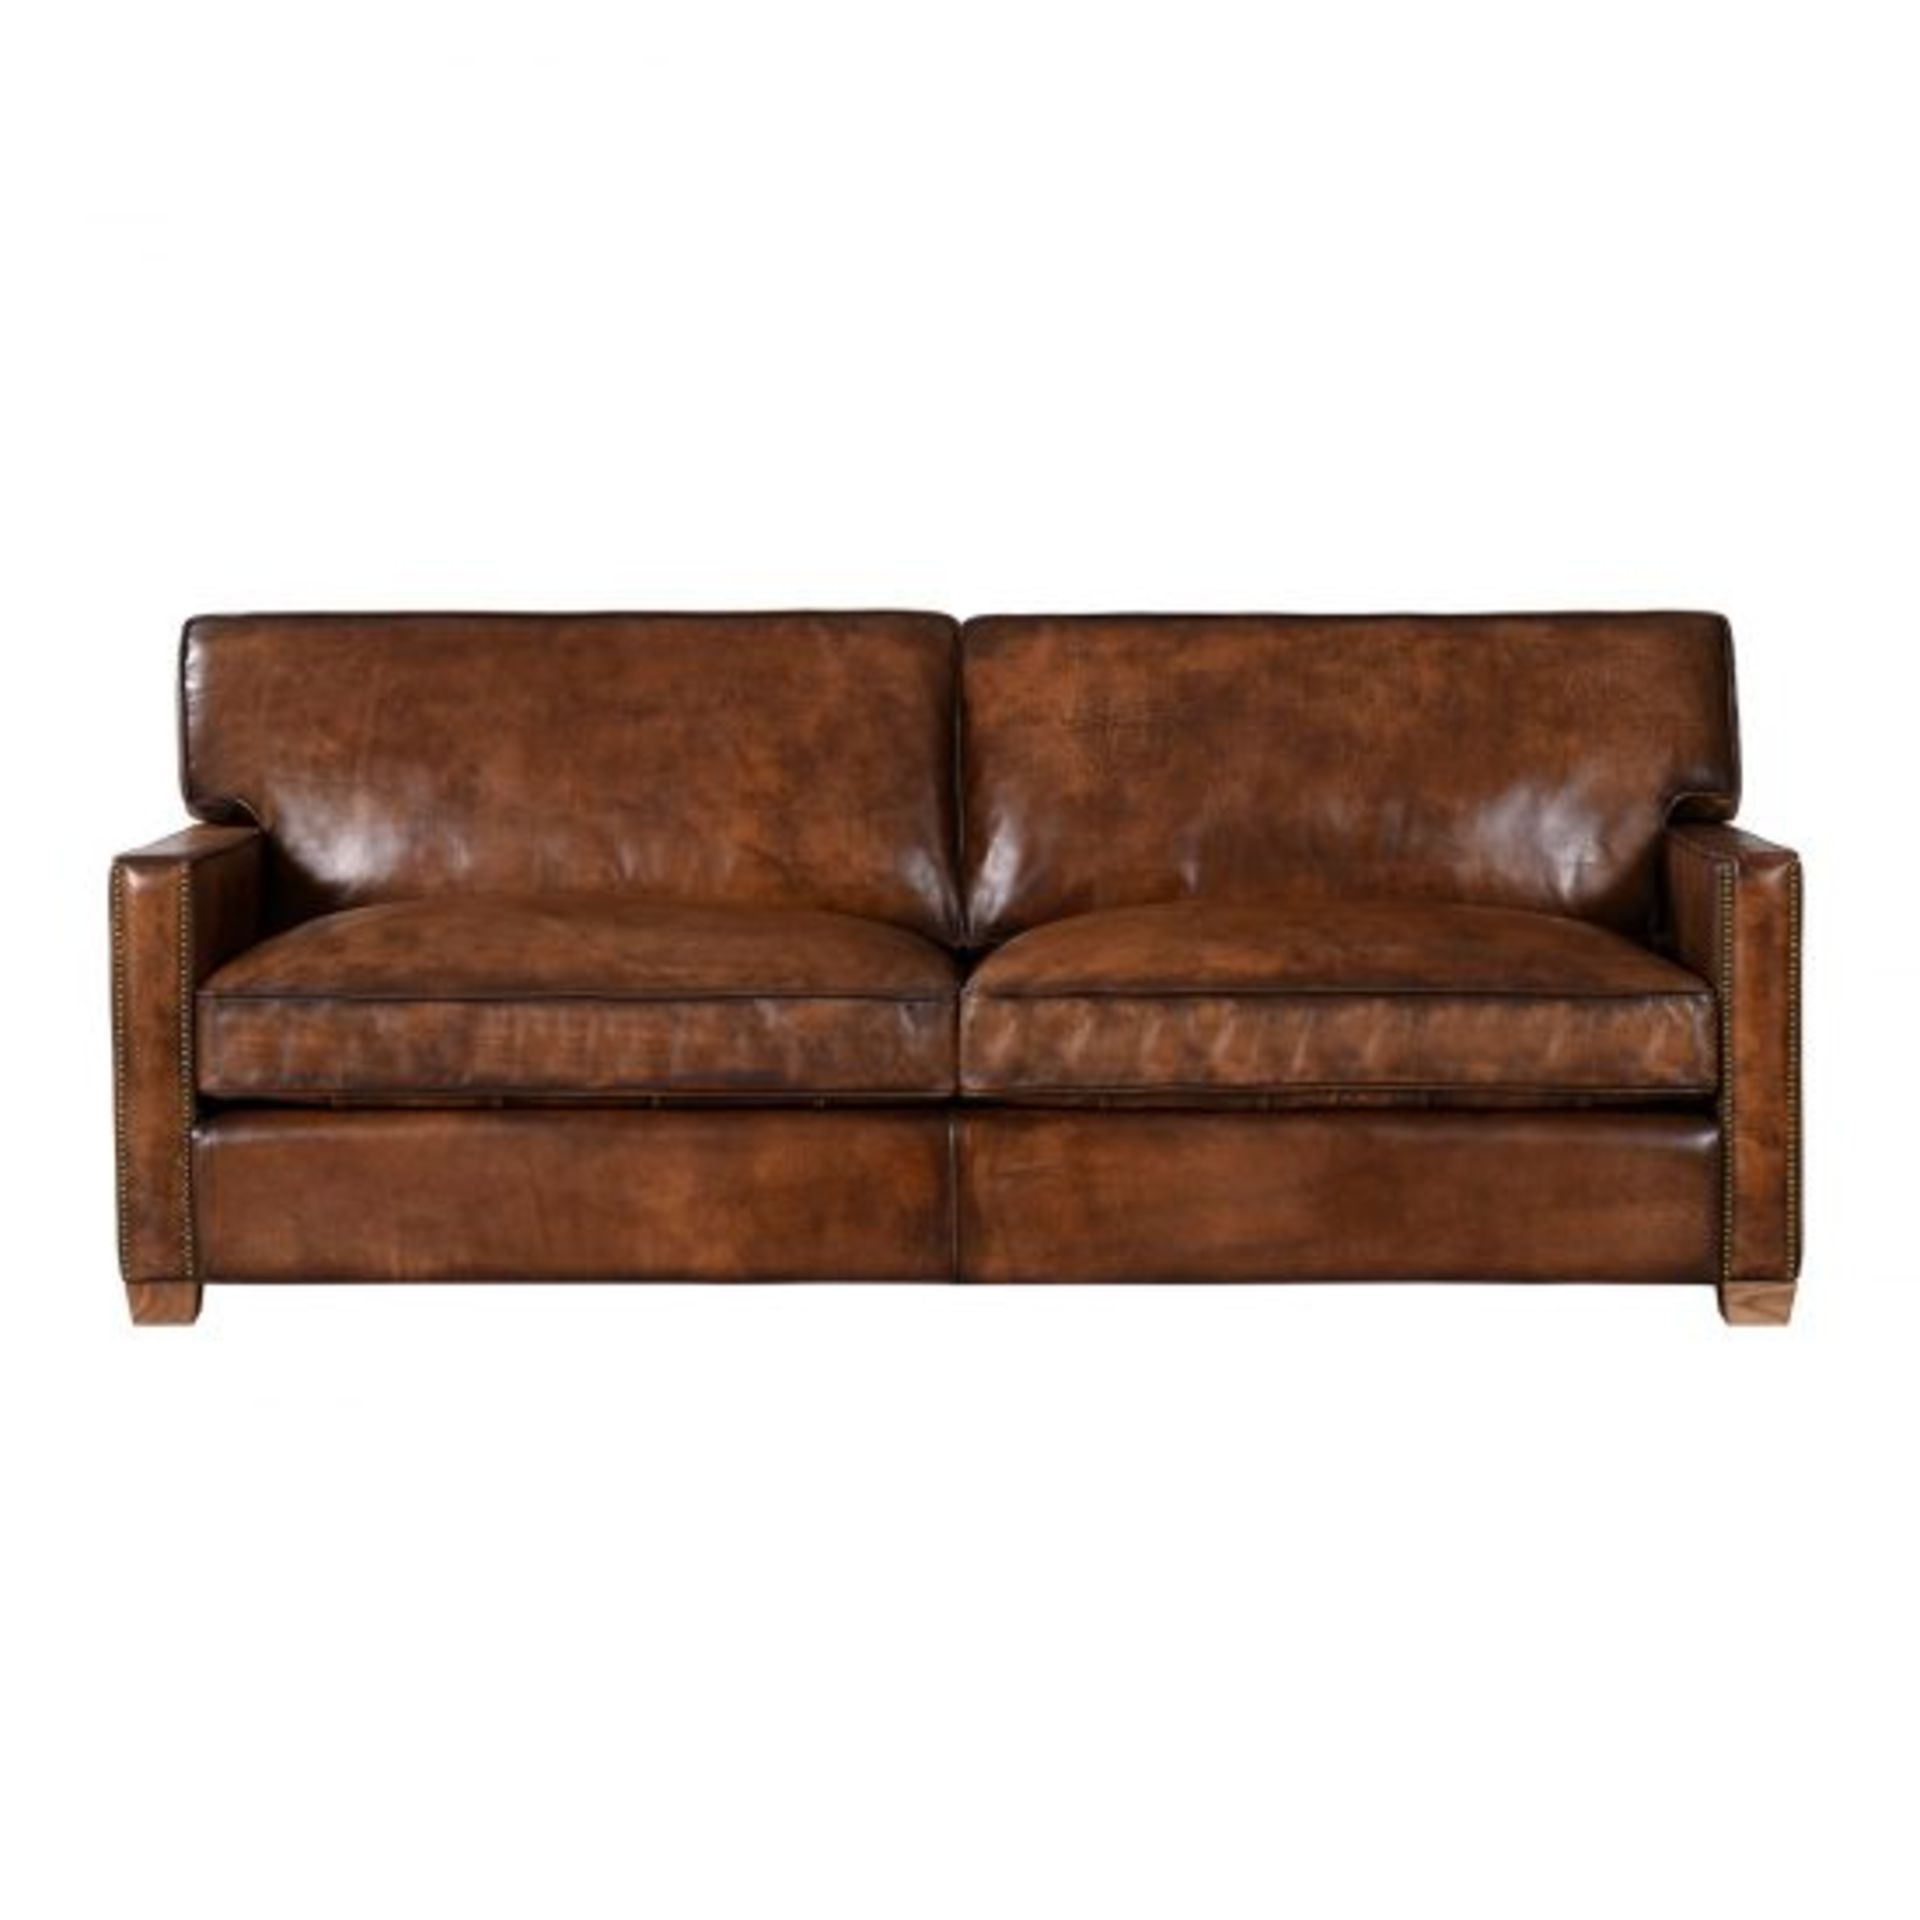 The Greaves Sofa 1 Seater Original Vintage Espresso Leather The Greaves Is A Classic Sofa With Mid-